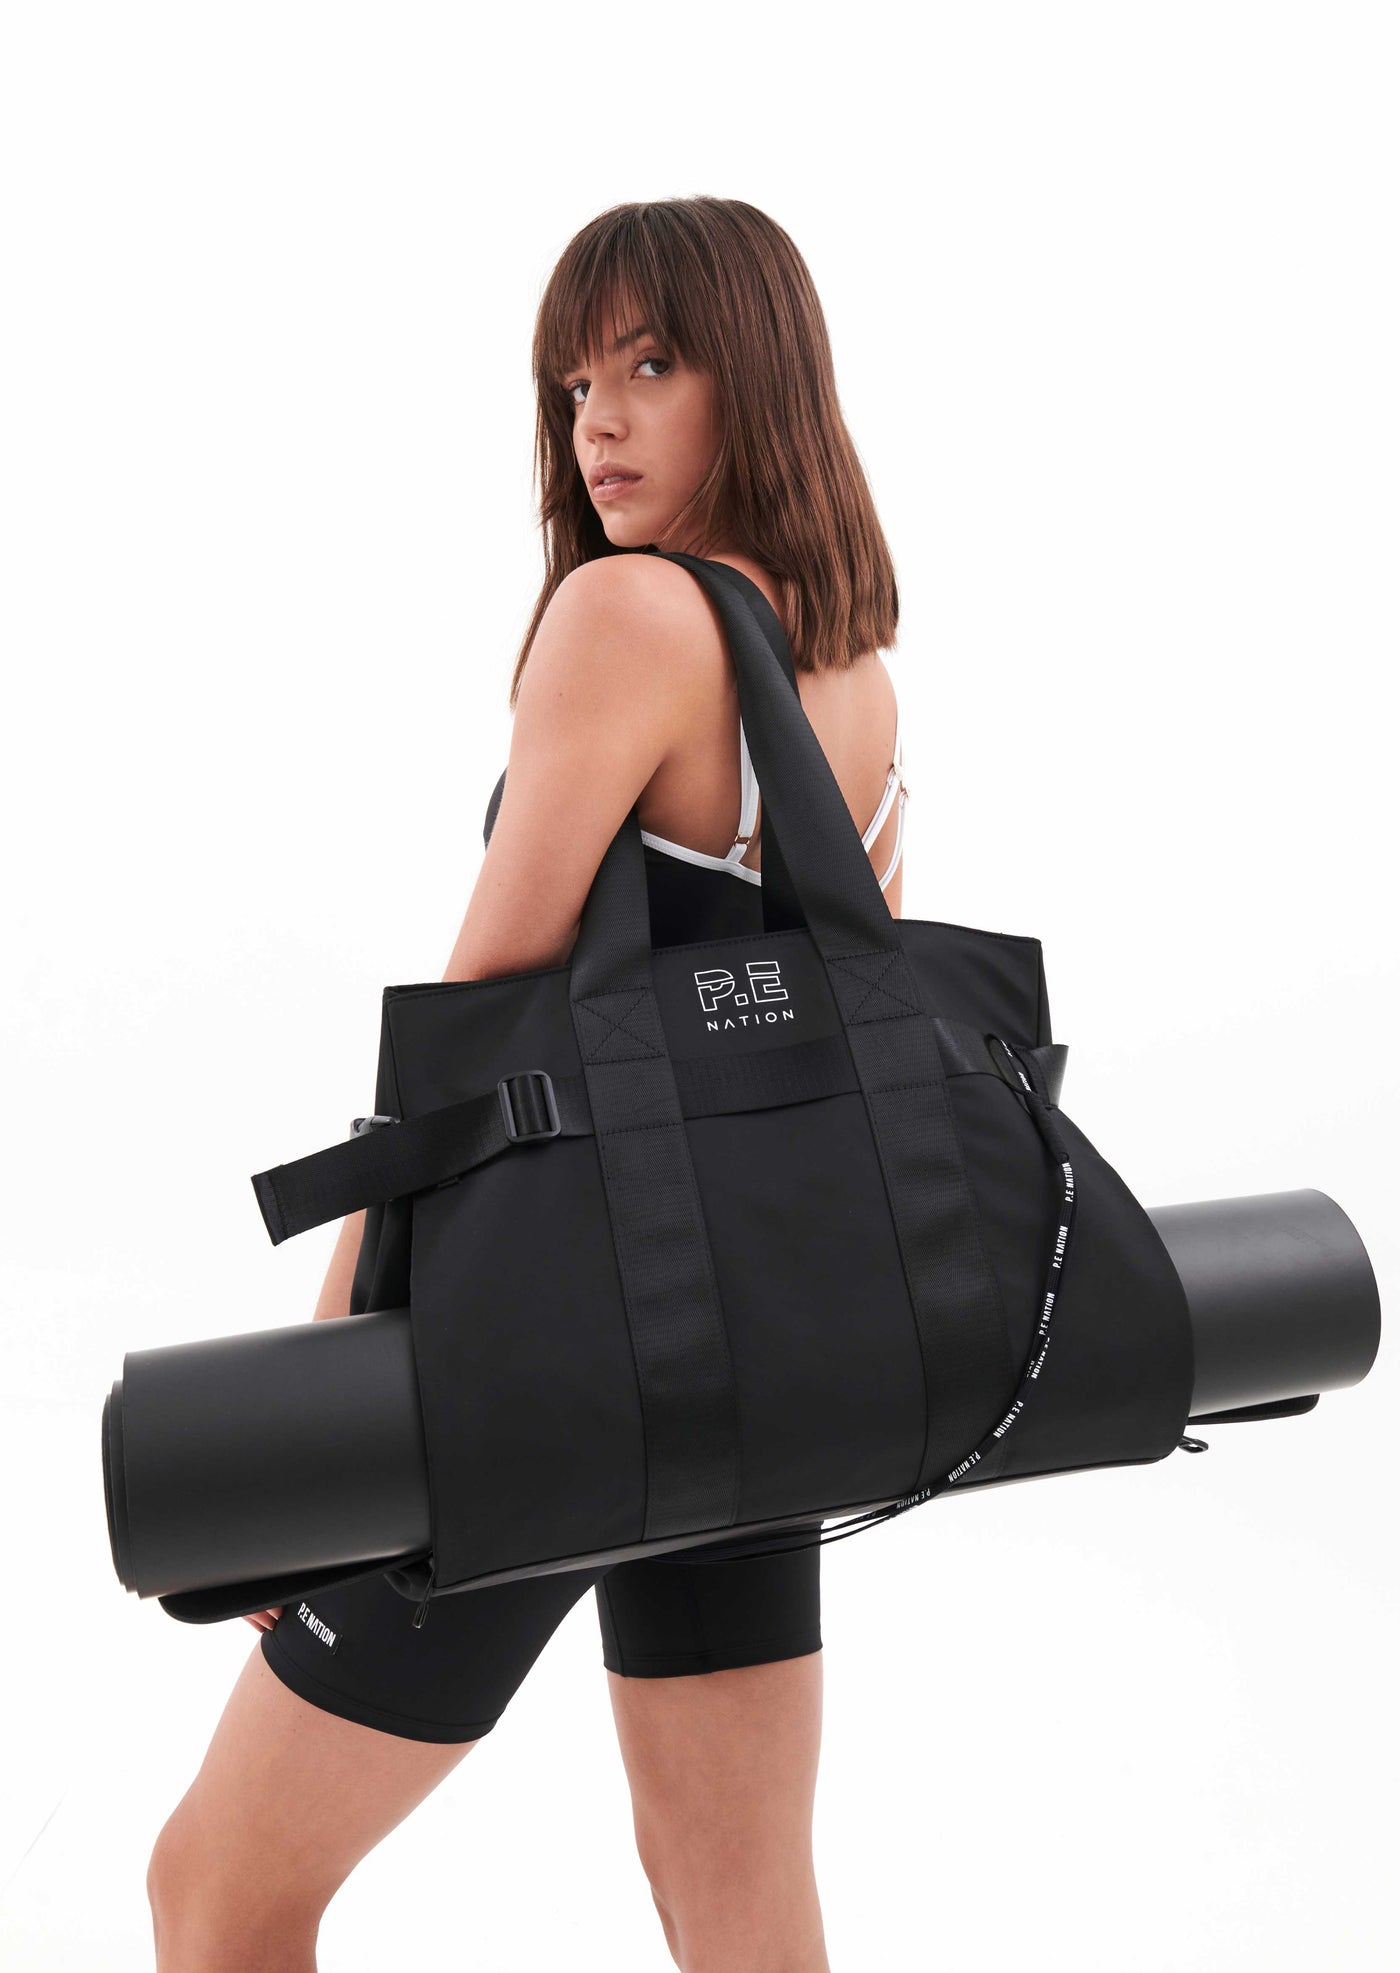 Transience Neoprene Yoga Bag - Black - ShopStyle Workout Accessories